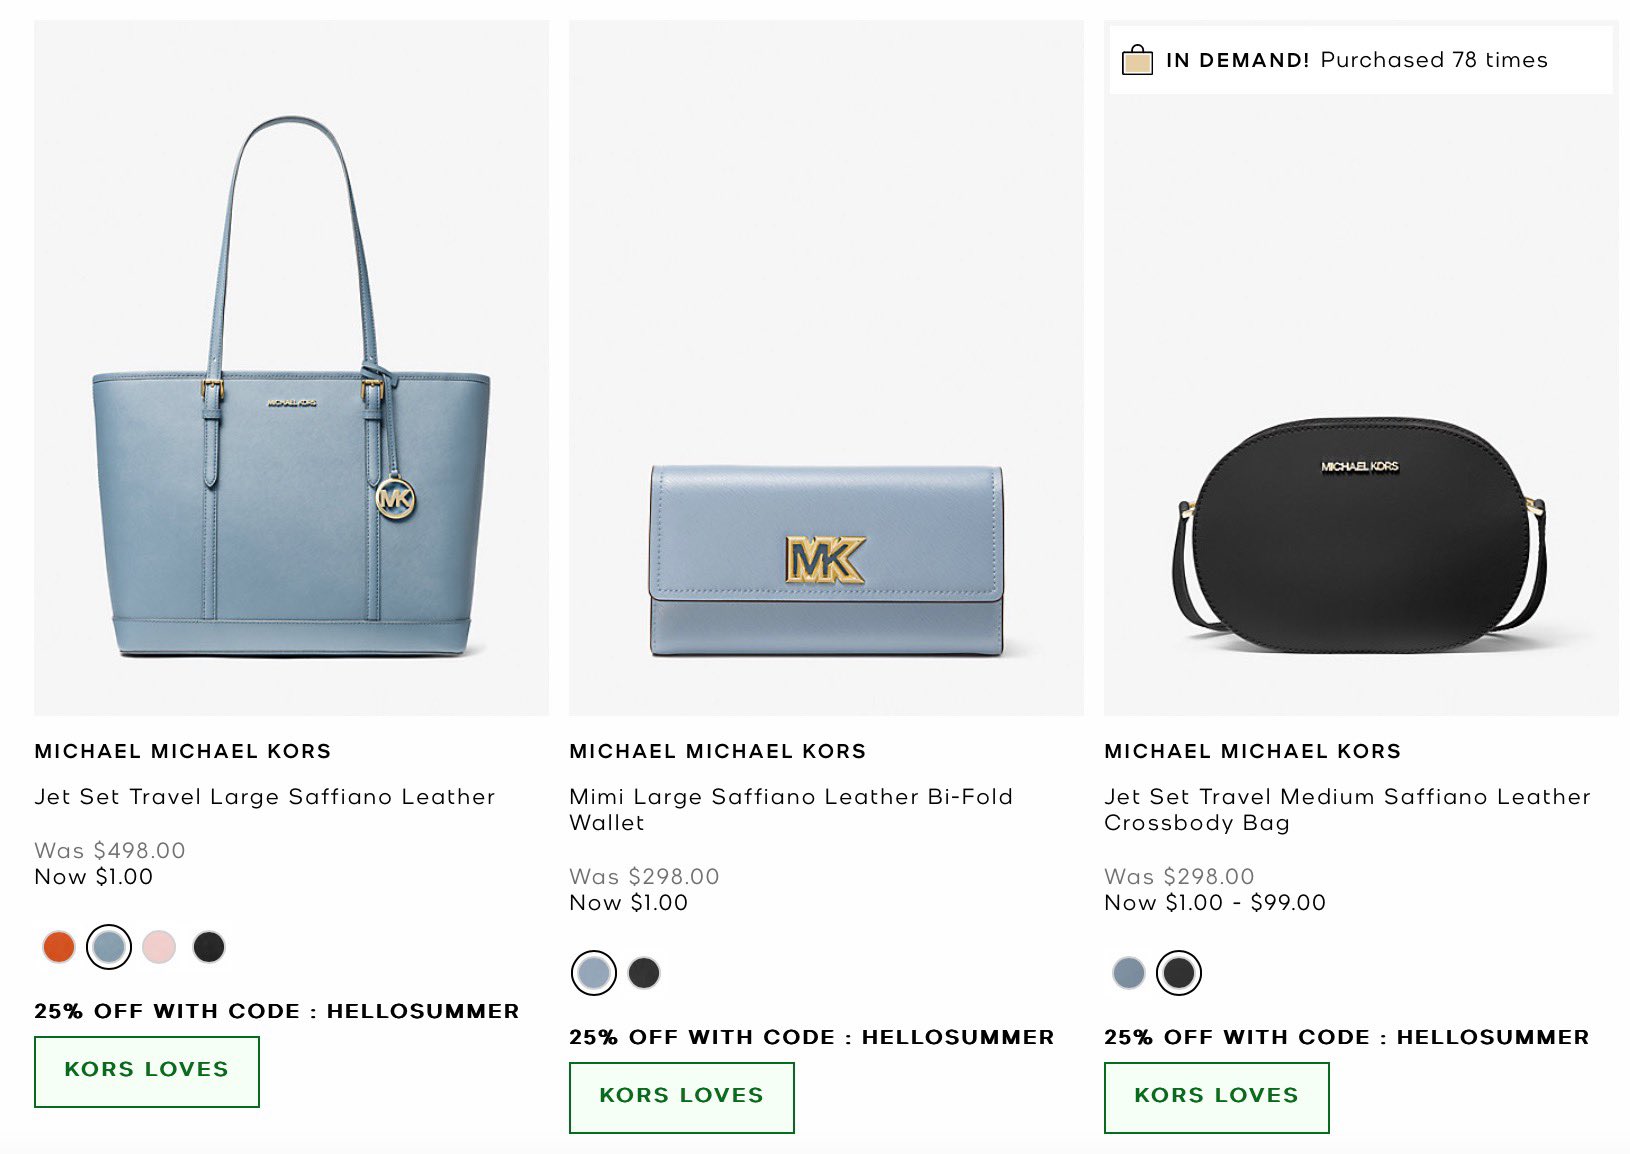 Lord Of Restocks • Hot Deals Freebies on Twitter: "🔥🏃‍♂️RUN!! Kors Handbags low as 𝗢𝗡𝗘 𝗗𝗢𝗟𝗟𝗔𝗥 Michael Kors ‼️Sort low-to-high from this link to view the listings. Select